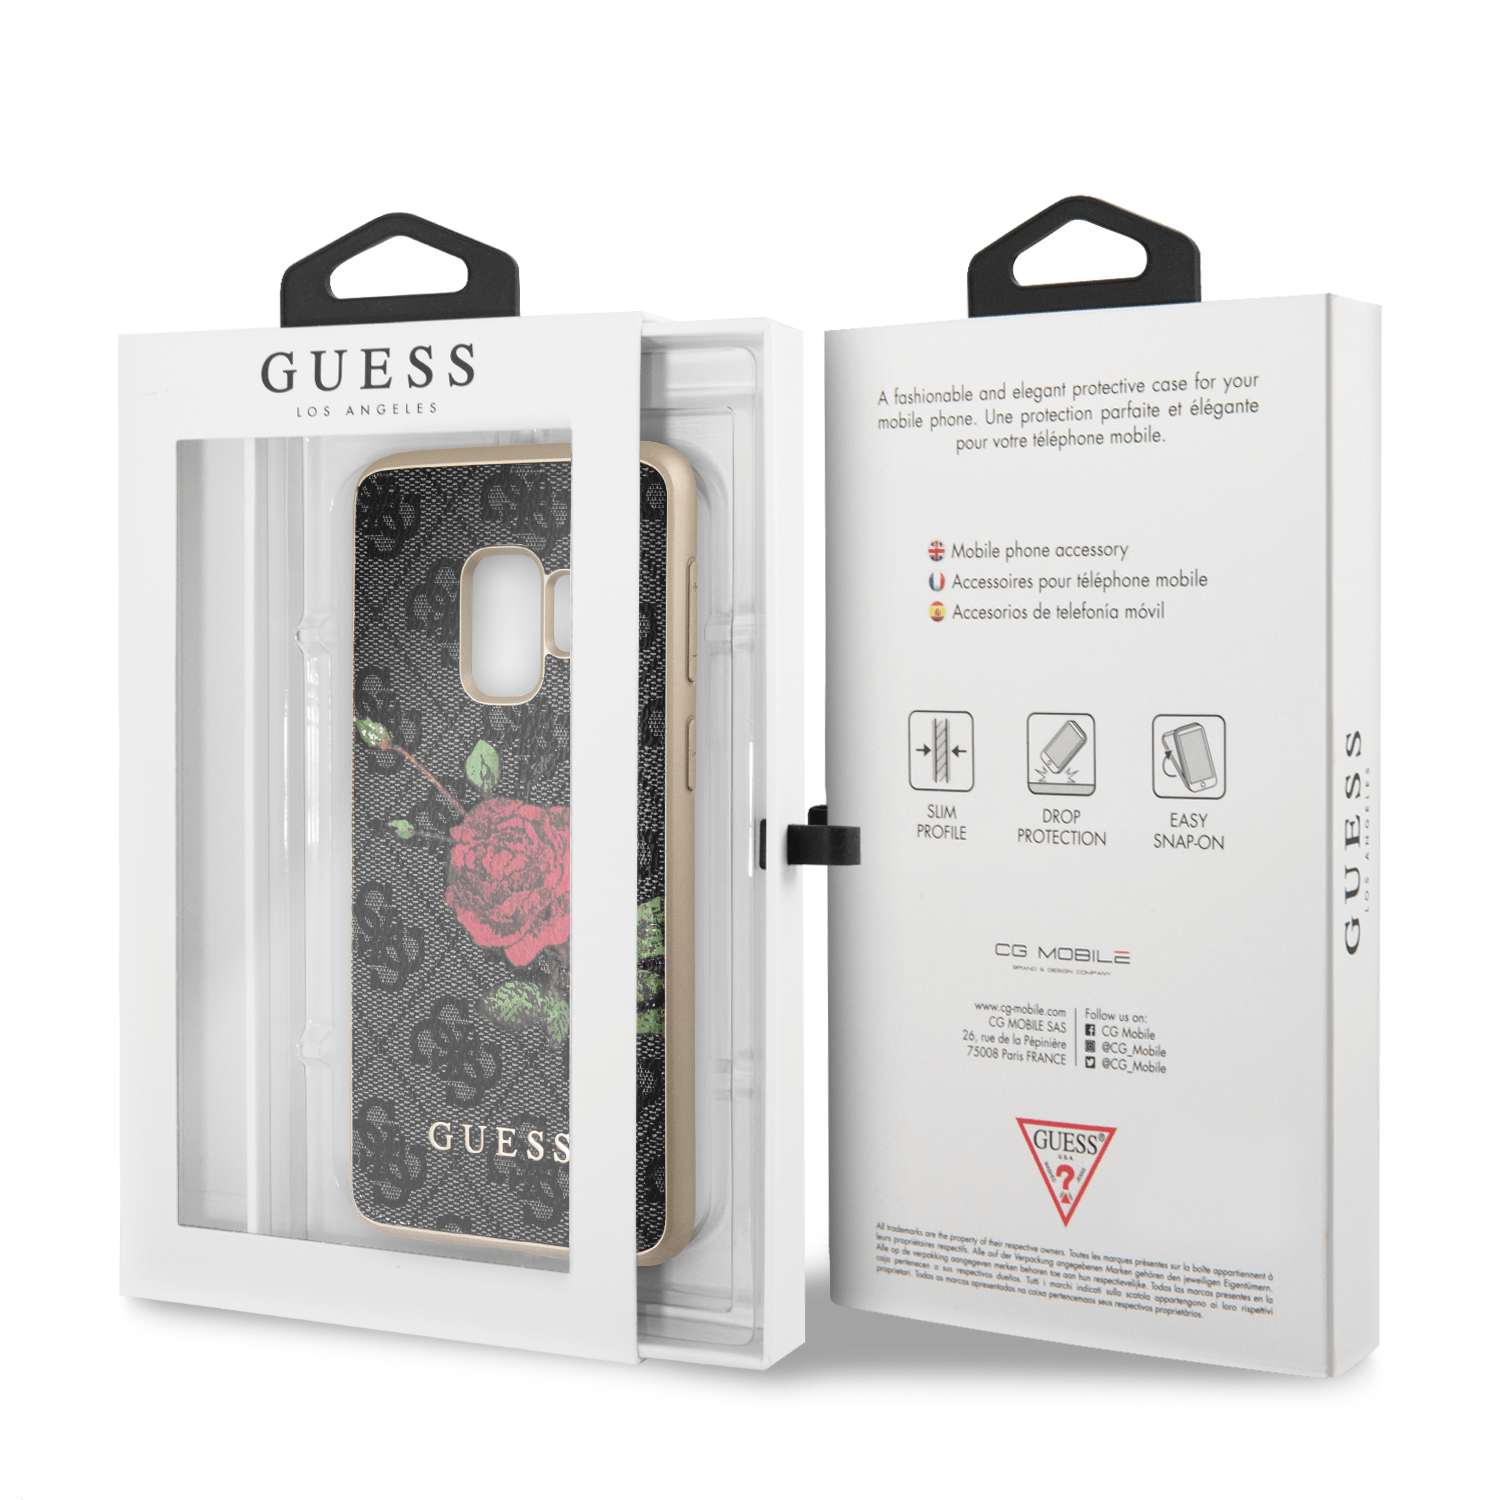 Designed for ease of use while protecting your investment, this sexy, young, and adventurous cell phone case offers both style and functionality.